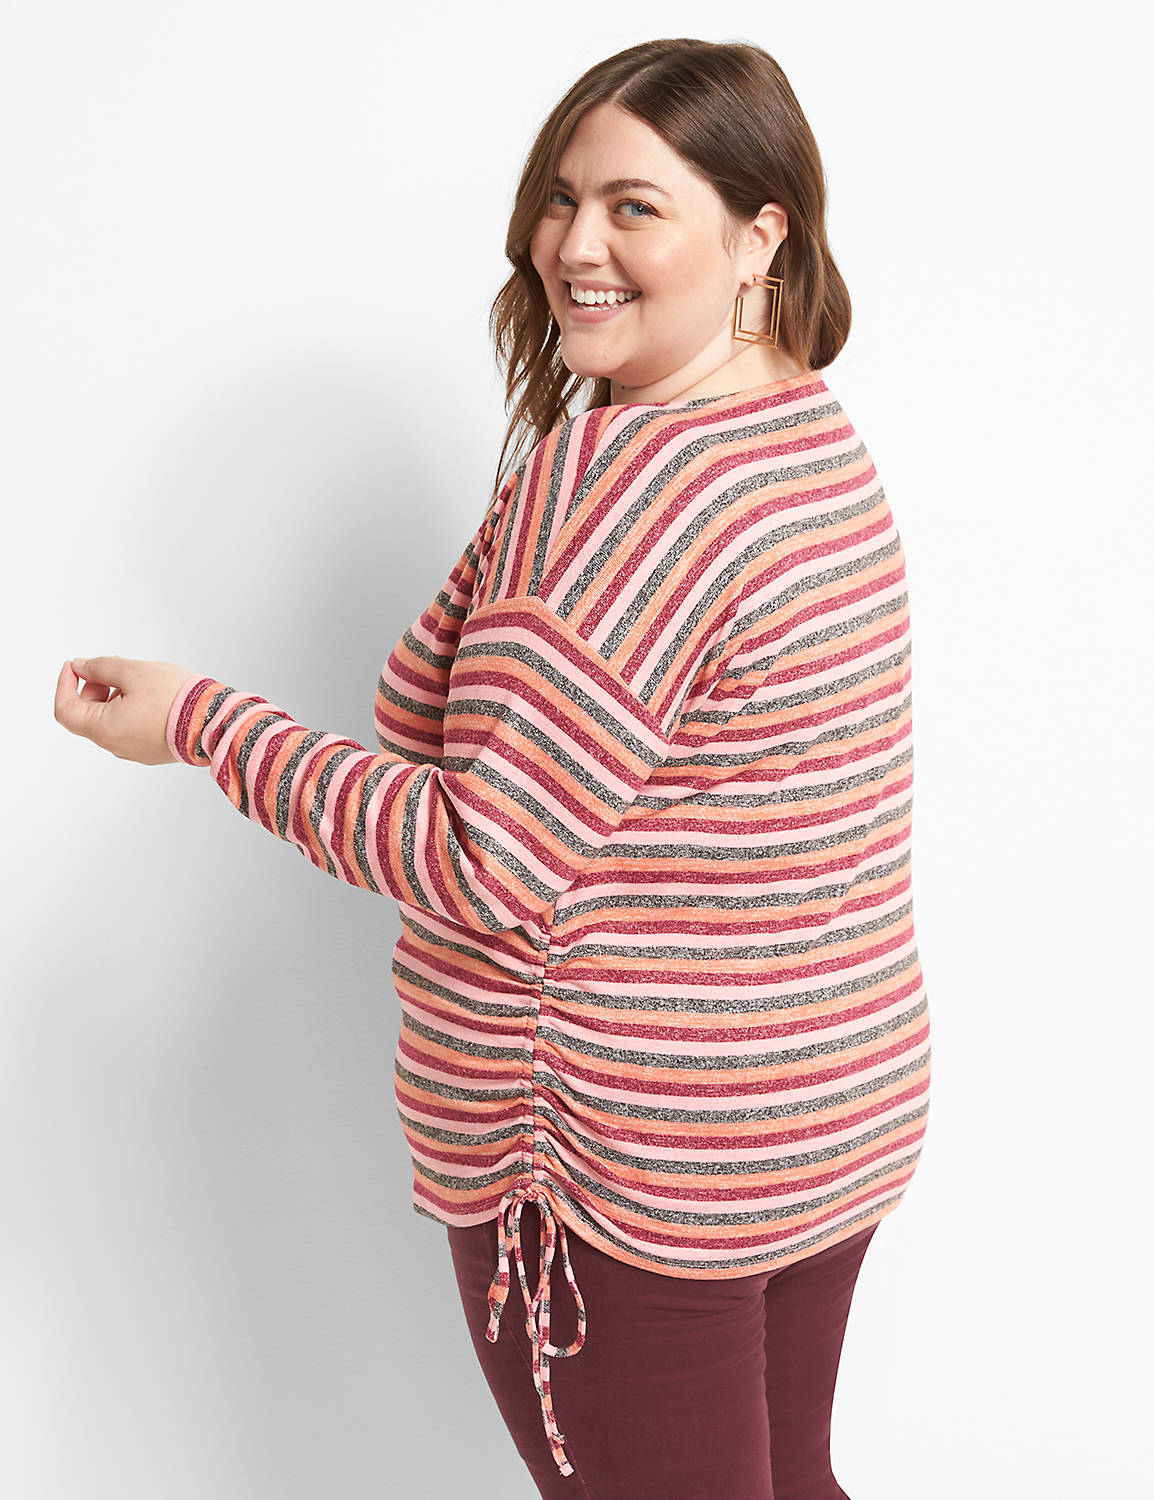 Long Sleeve Drop Shoulder Boatneck Tee With Side Drawcord And Hacci Stripe 1122625:Stripe:10/12 Product Image 2